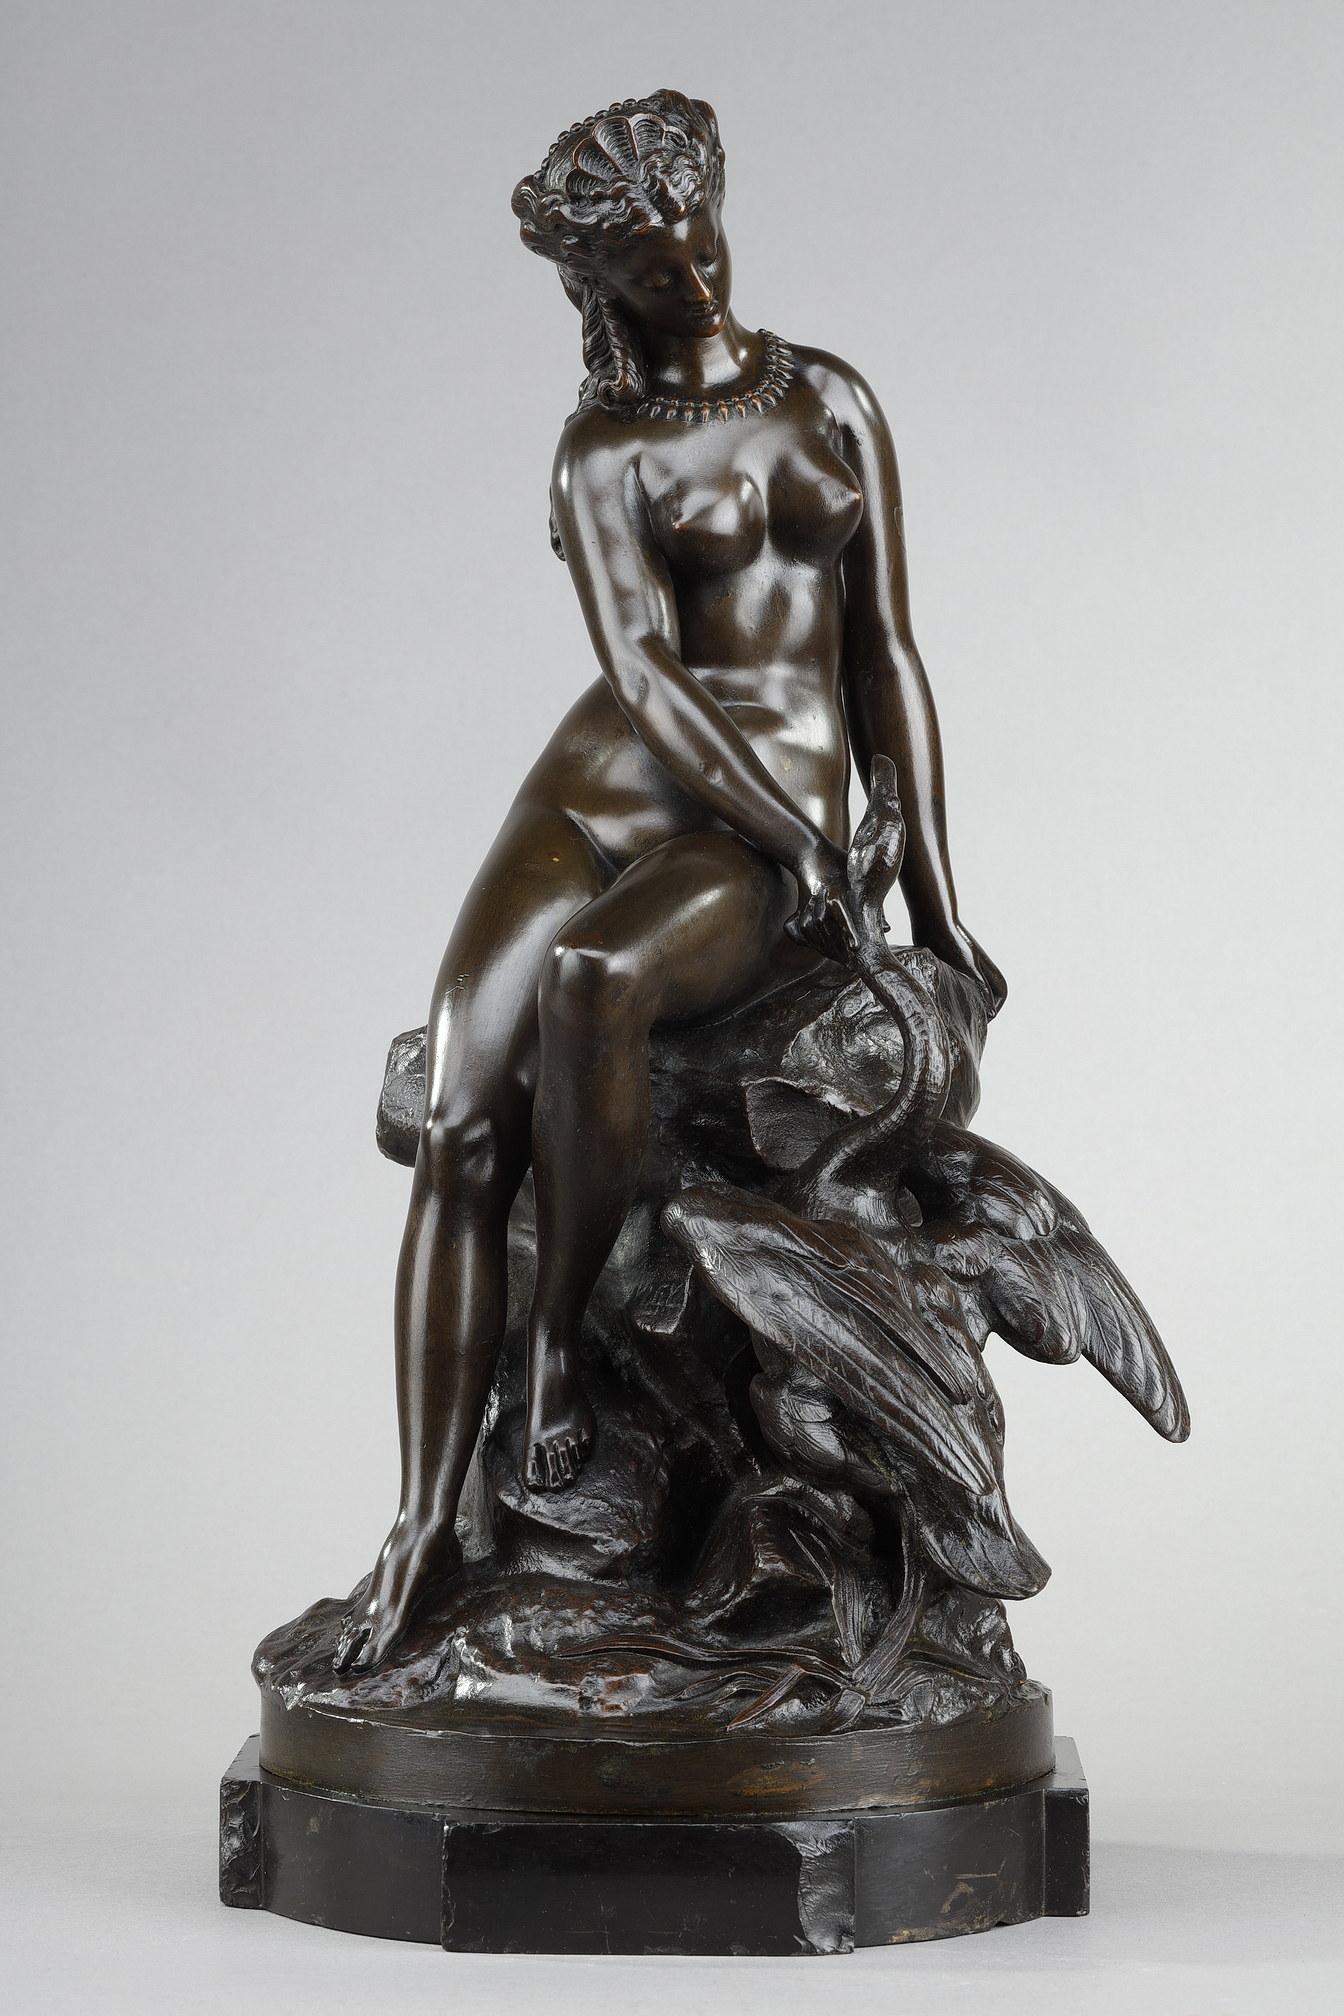 Proof in bronze with shaded brown patina depicting Leda and the Swan. A great classic in the 19th century, based on the myth of Leda seduced by Zeus, who took the form of a Swan. Early edition cast signed on the mound. Black marble base.

Born in